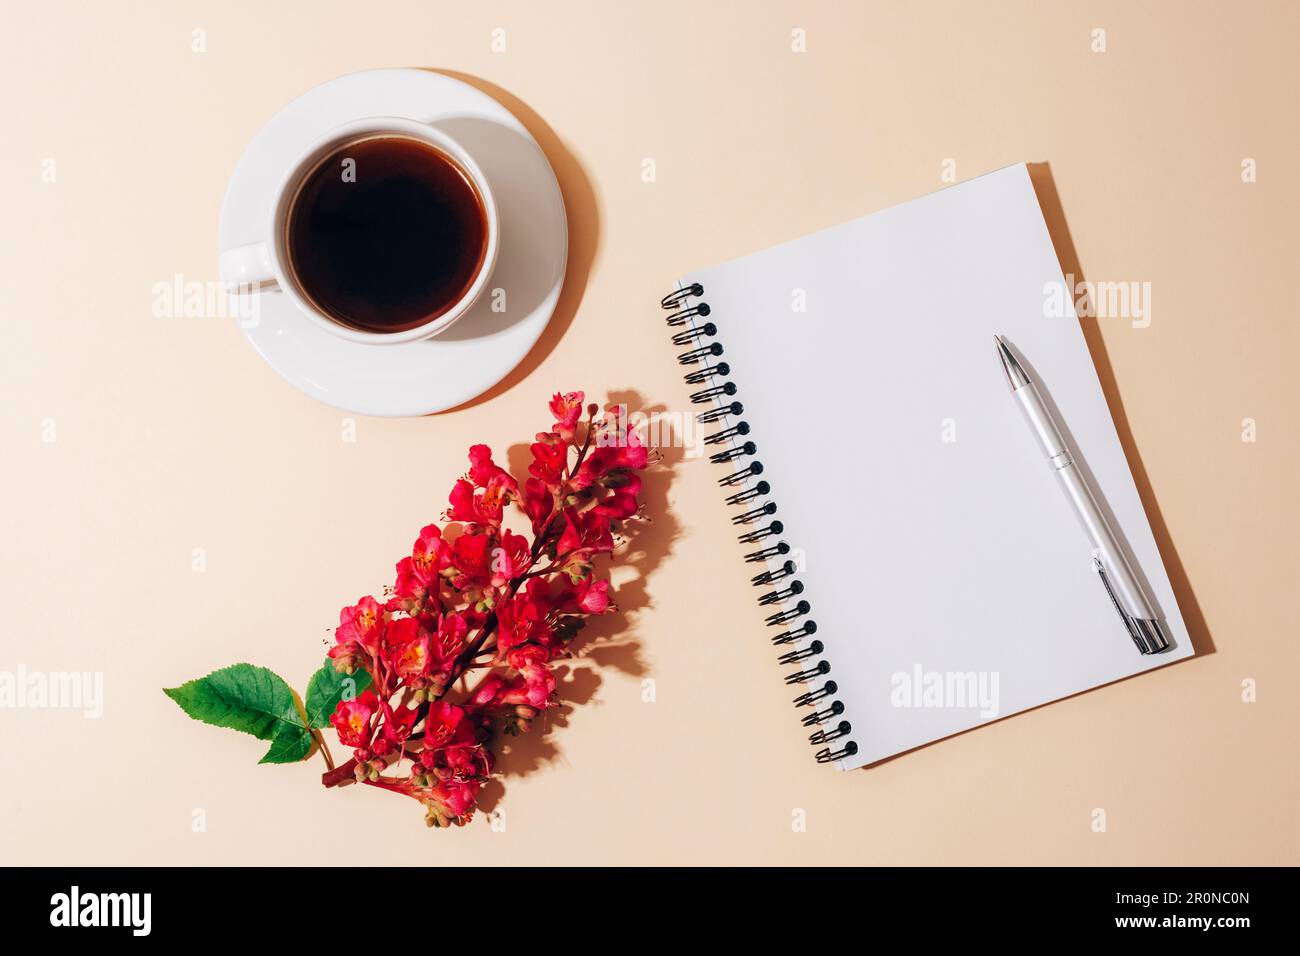 Blank notepad, pen, coffee cup and Aesculus Carnea flower on light beige table with sharp shadows. Holiday concept. Top view, flat lay, mockup. Stock Photo